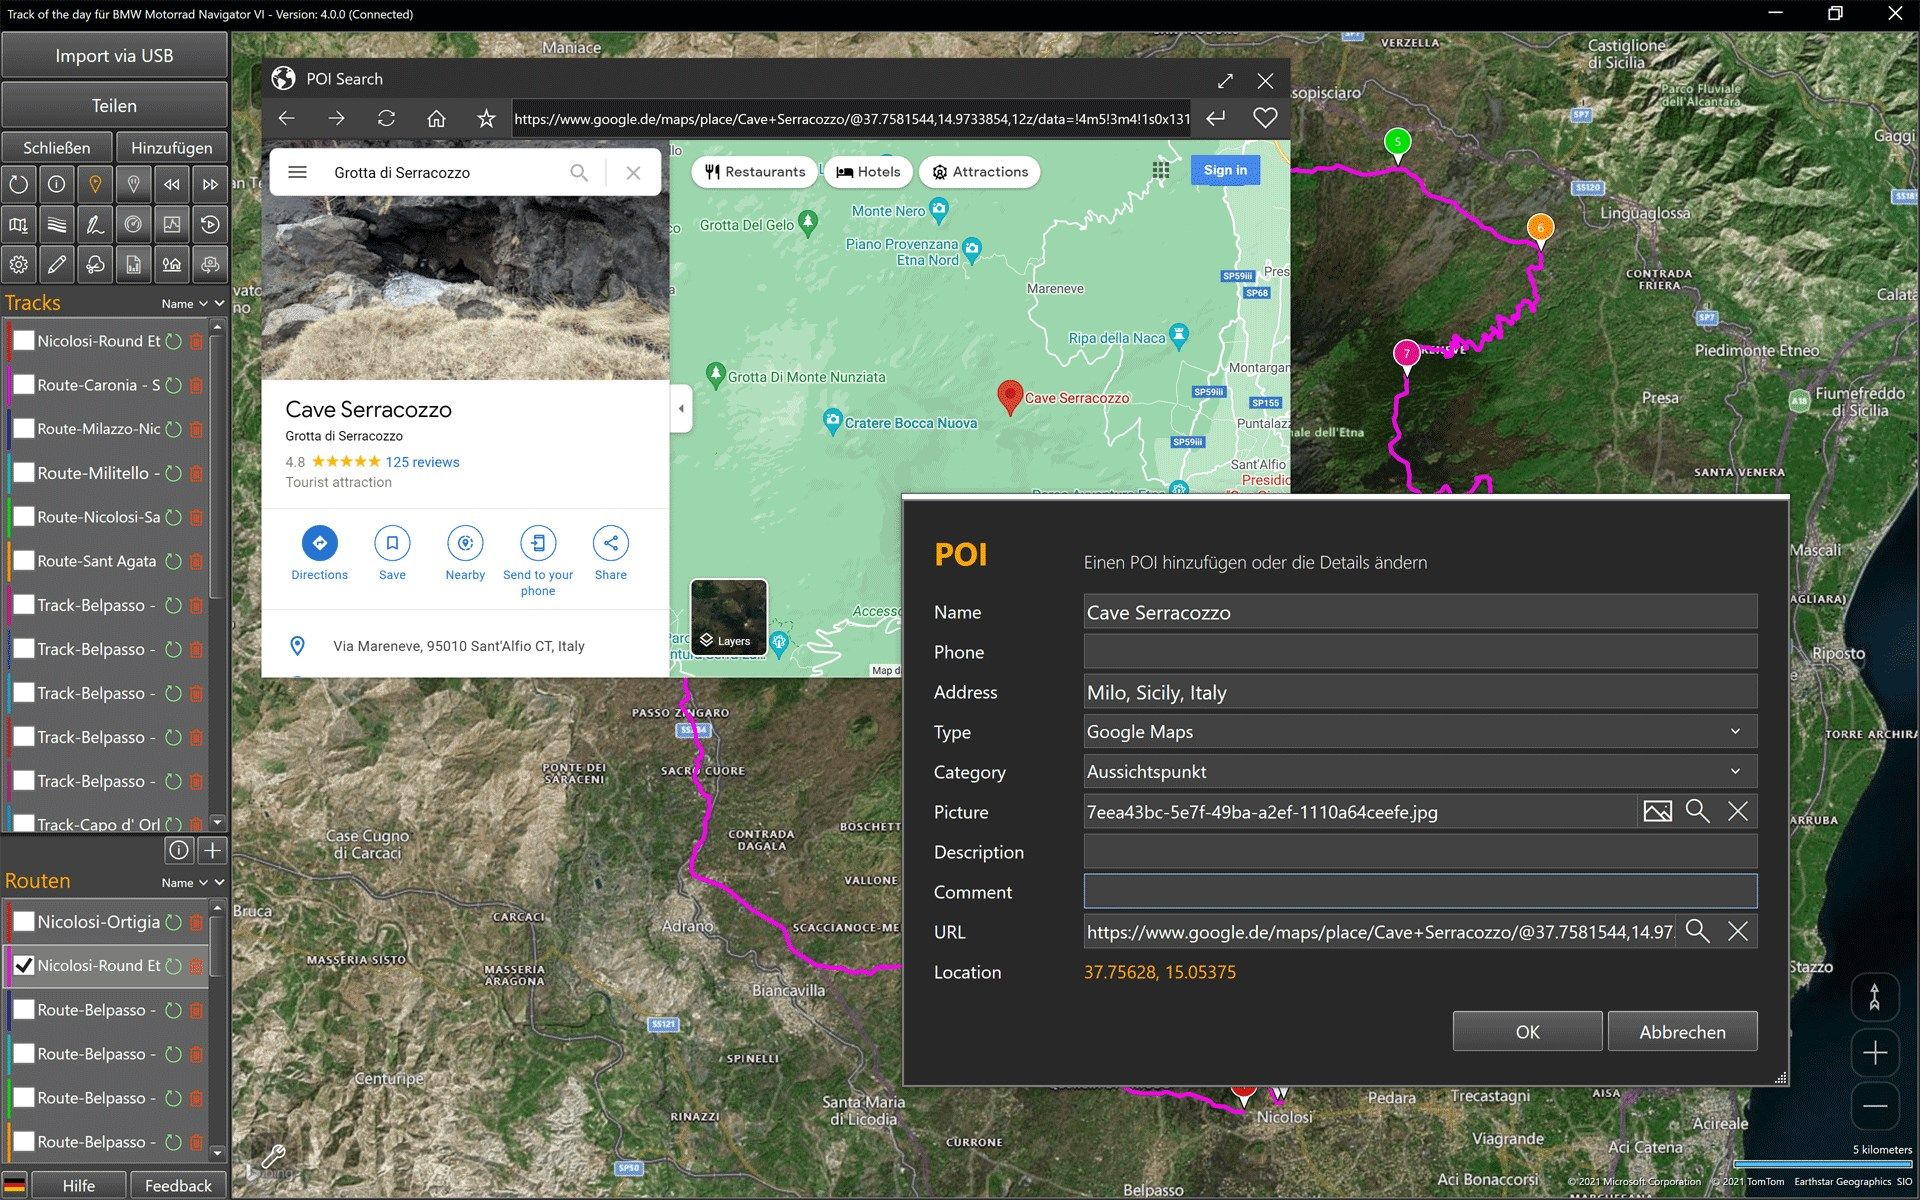 Advanced POI search based on Google Maps with "One-Click" POI functionality